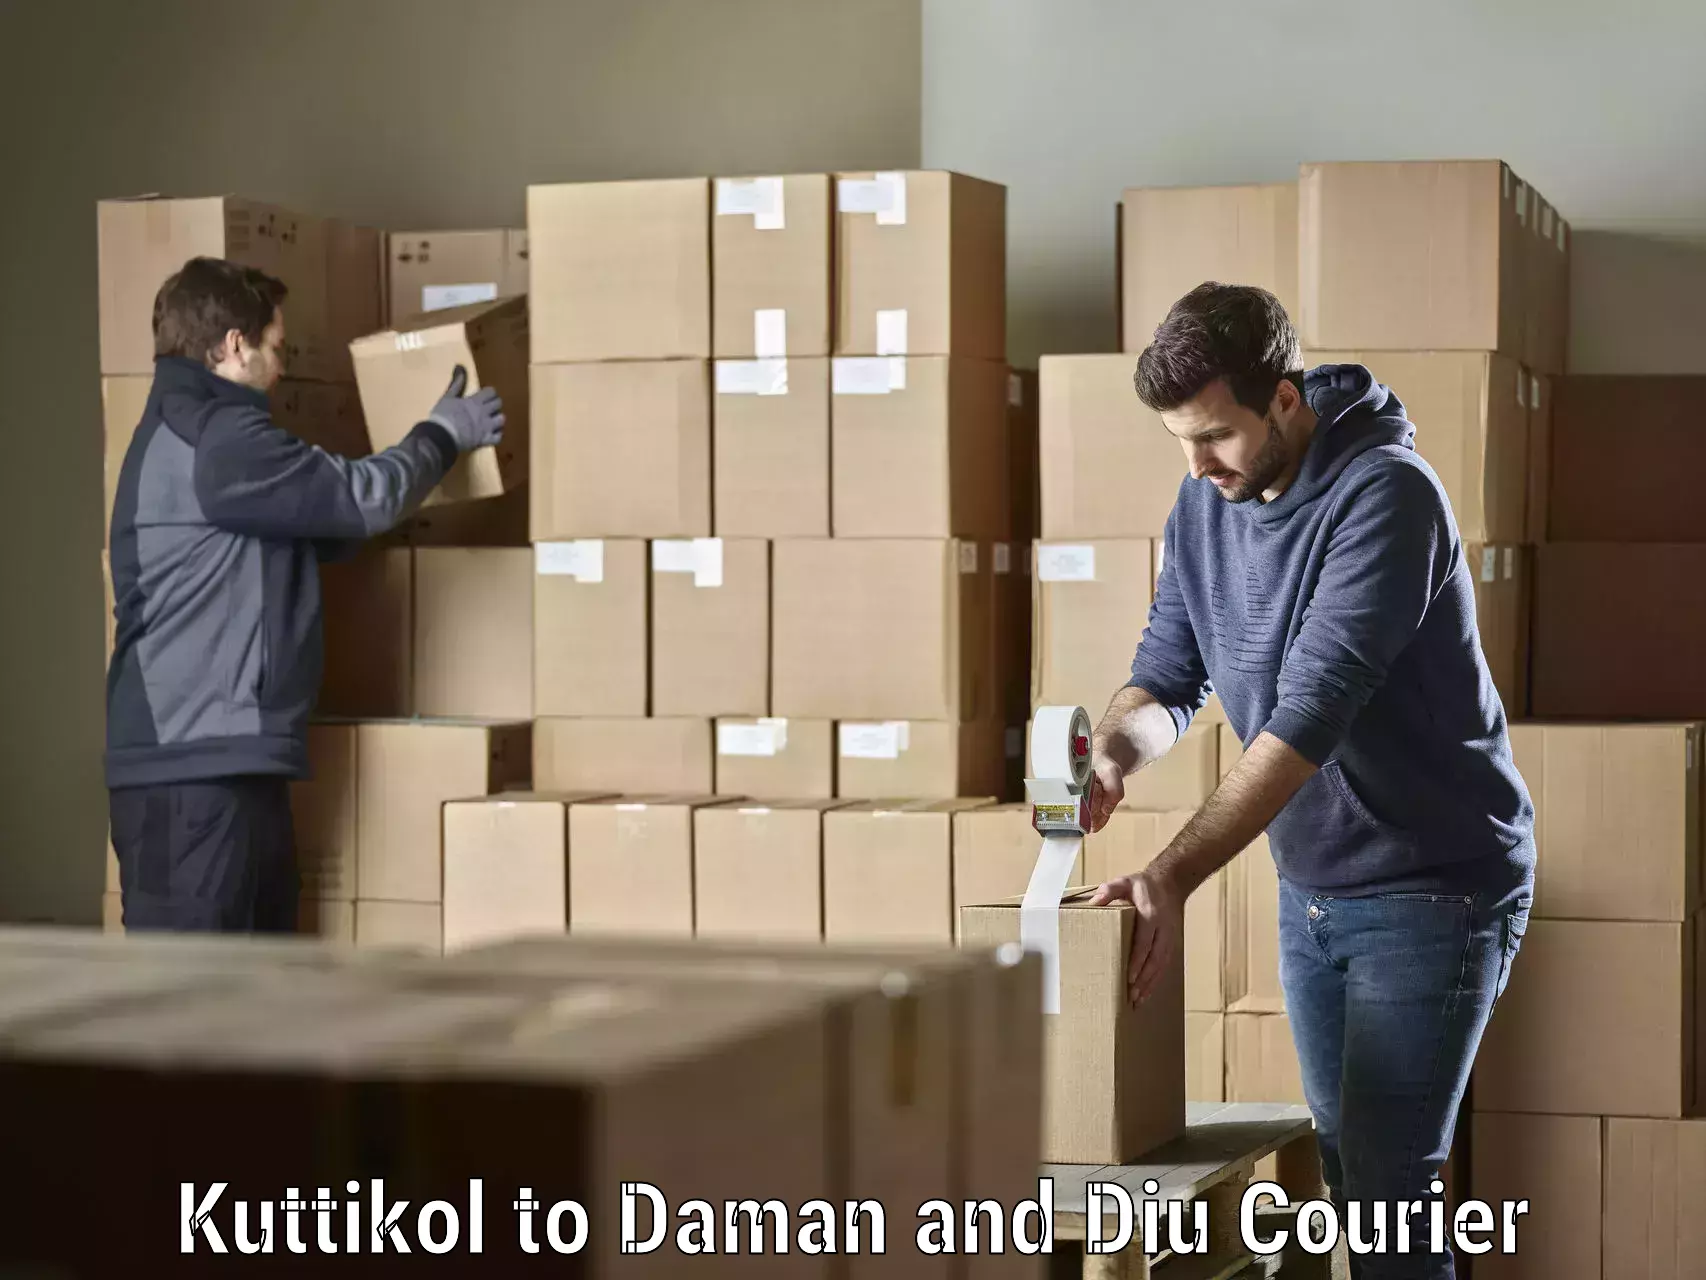 Reliable courier service Kuttikol to Daman and Diu